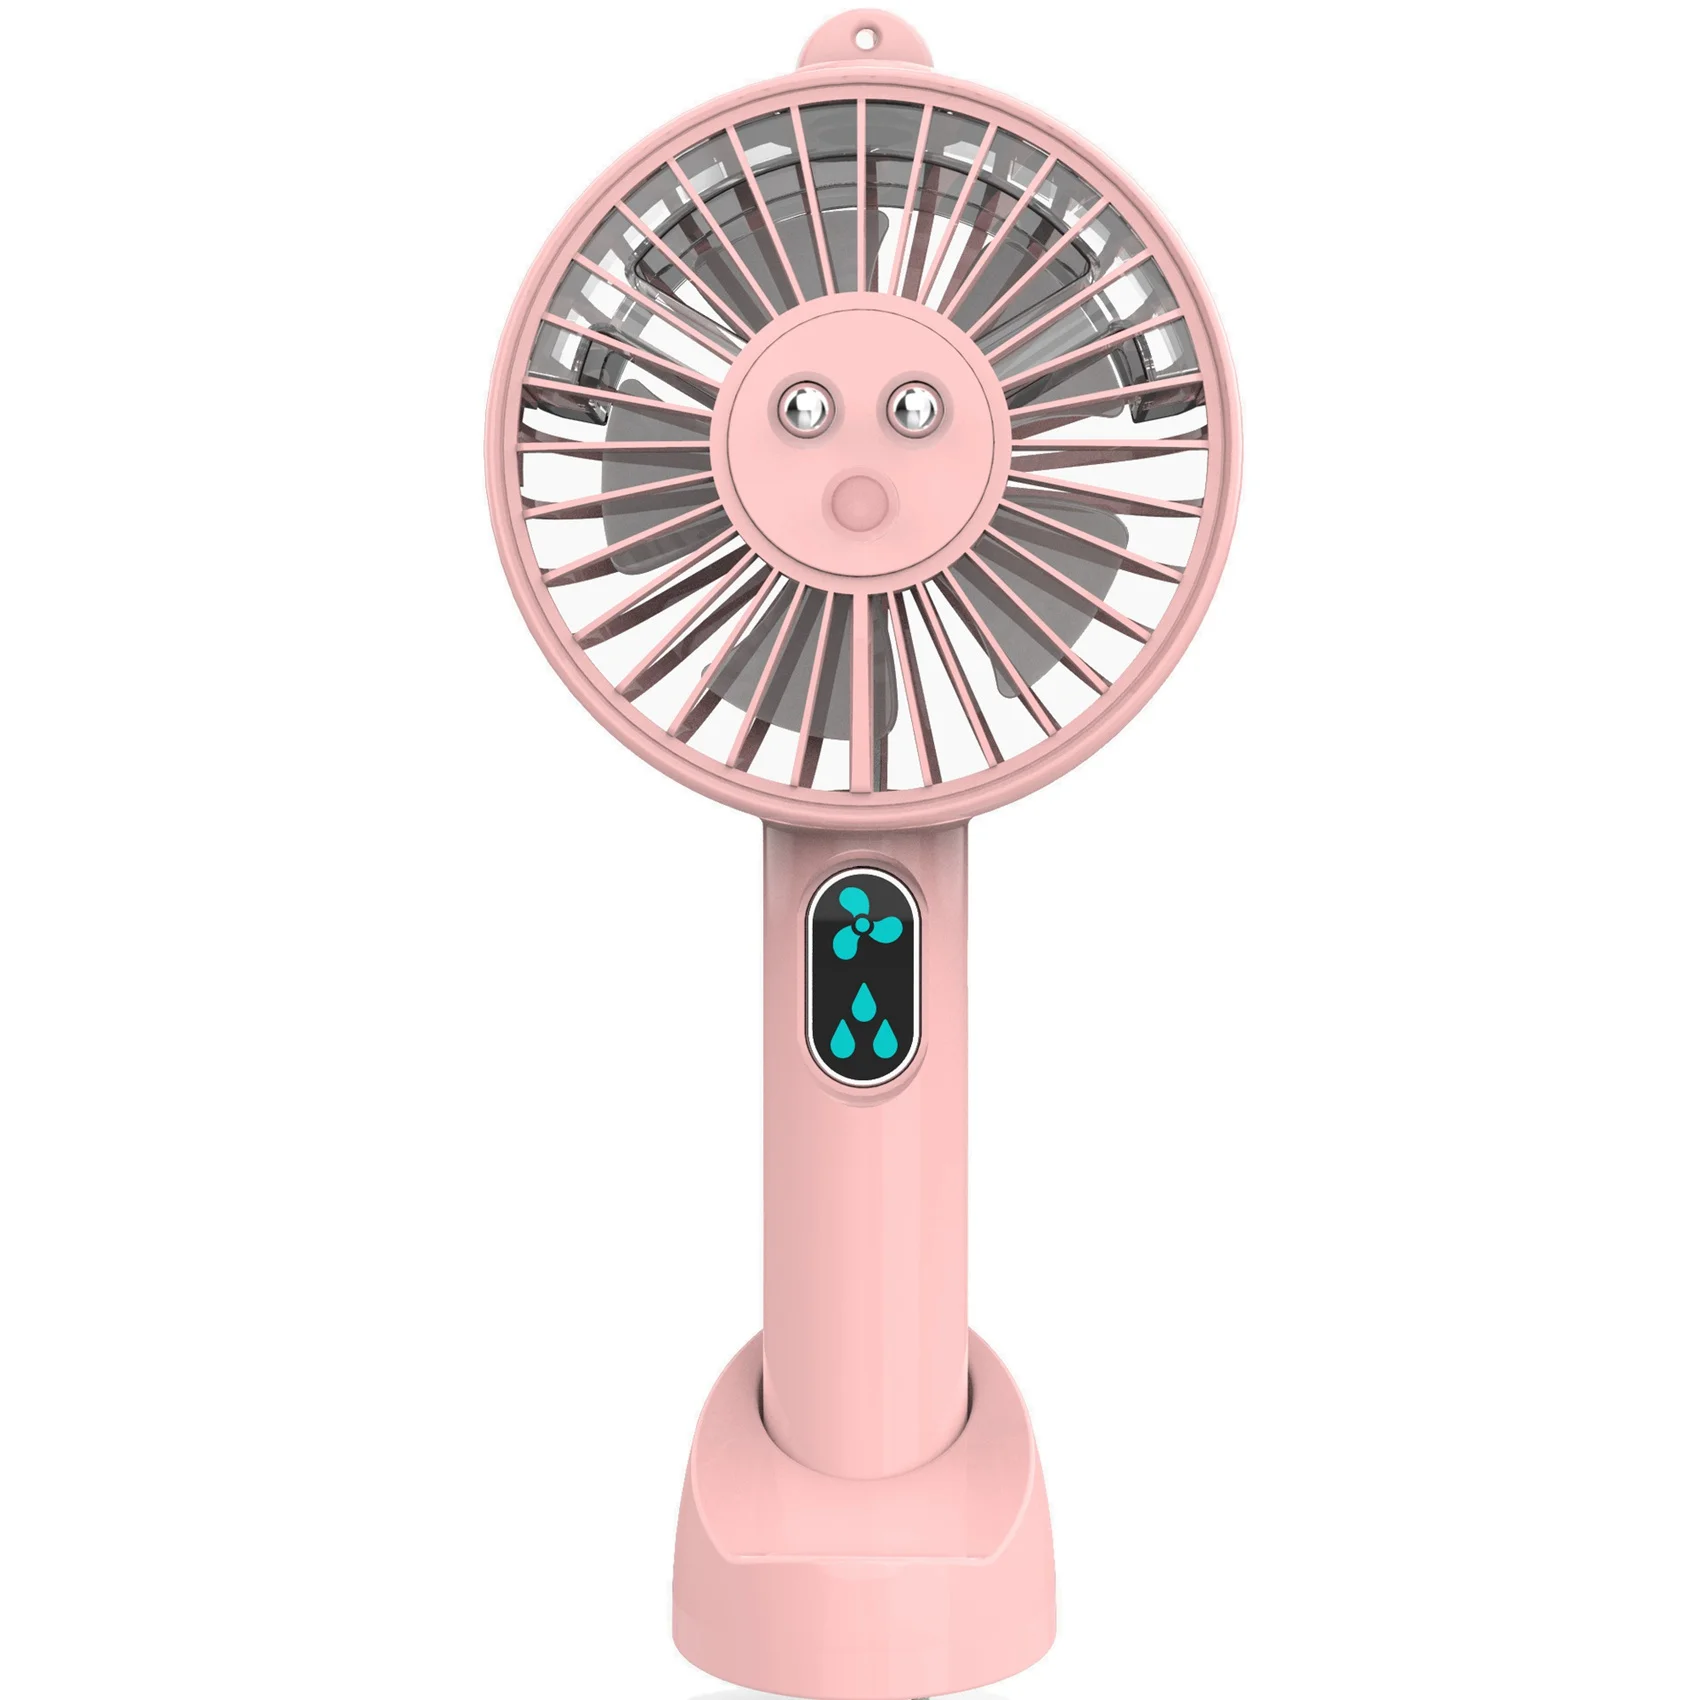 

Mini Humidifier Misting Fan 2000MAh USB Rechargeable Fan for Office Home Round Table Pedestal Cooling Fan-Pink